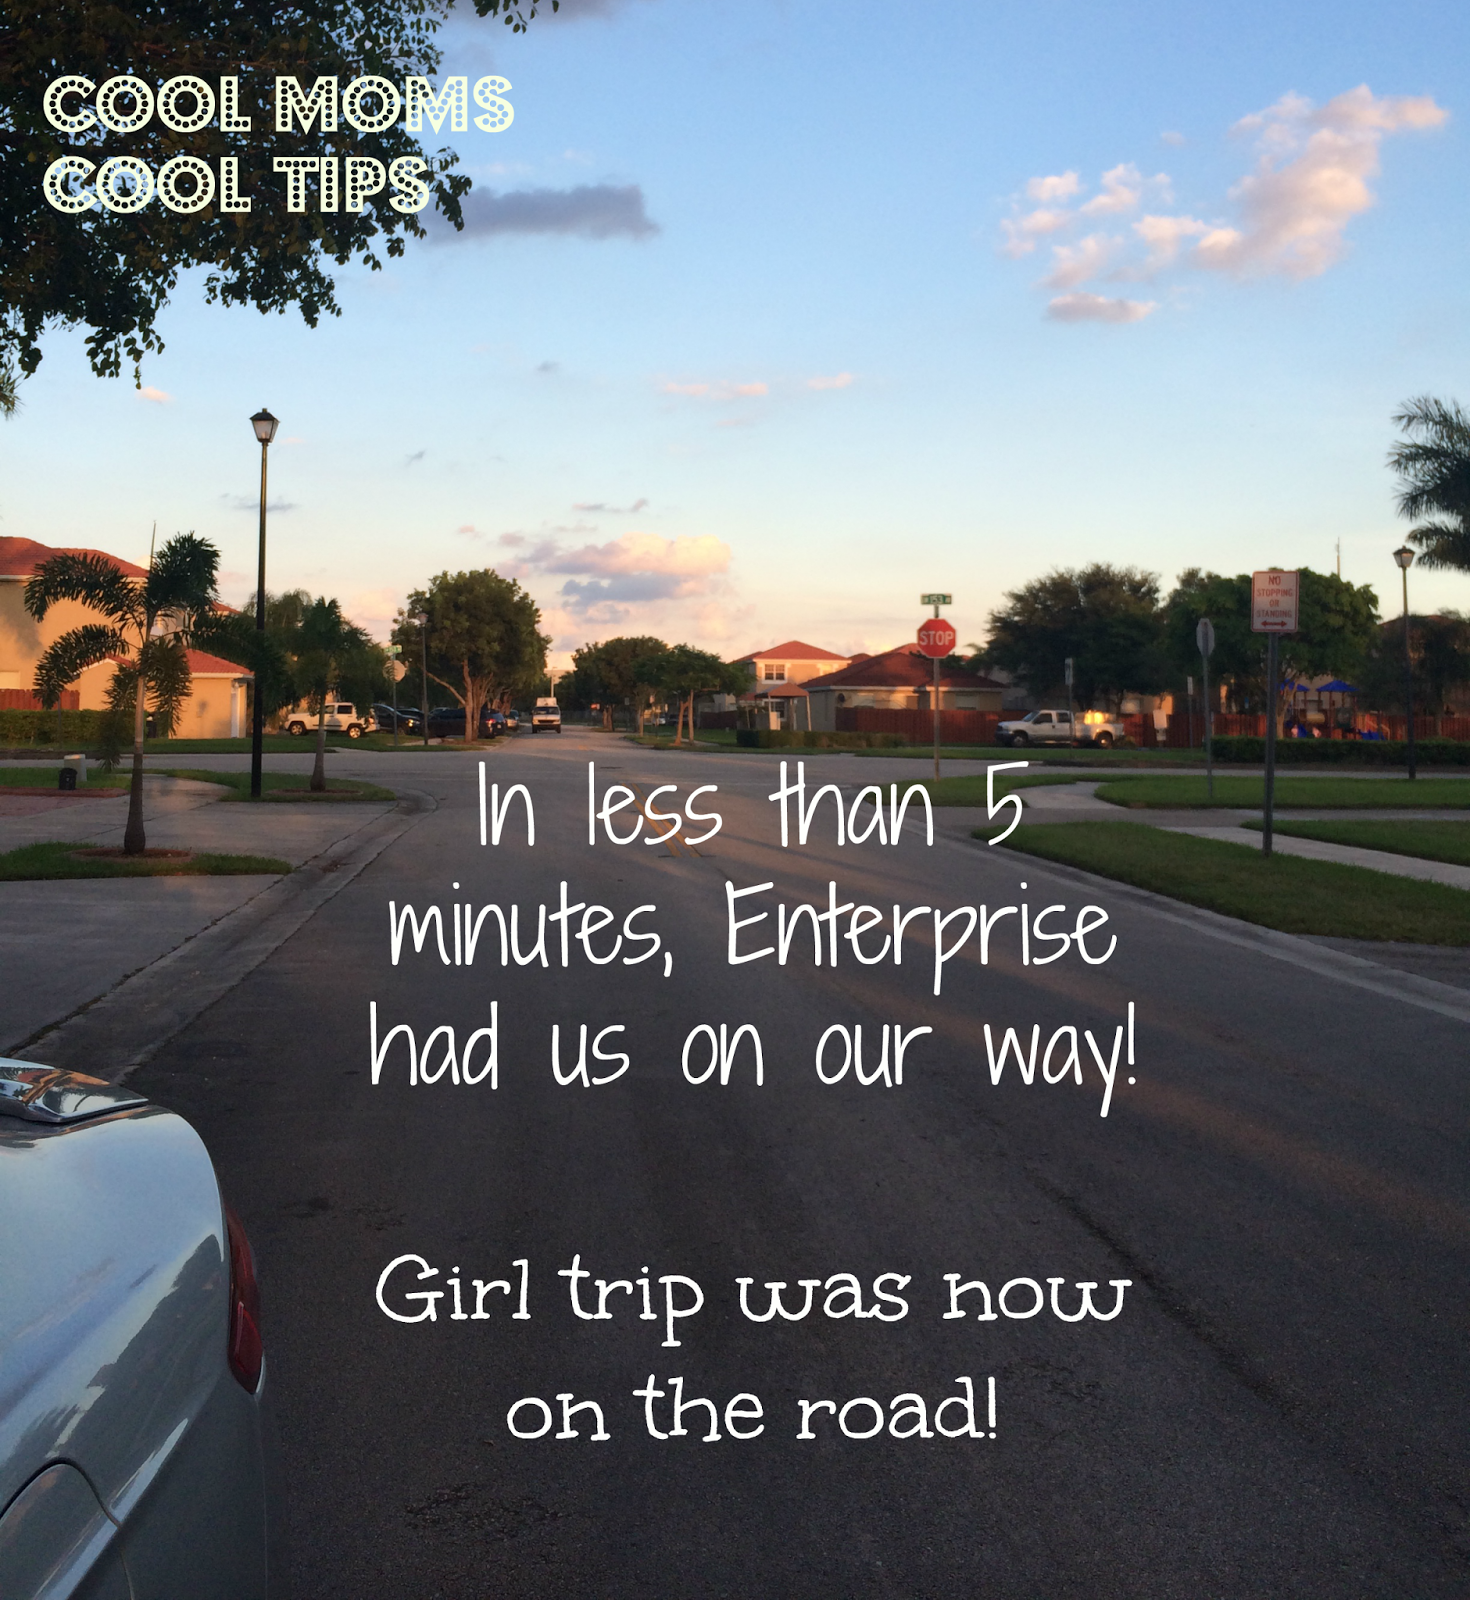 cool moms cool tips Enterprise got us on the road in 5 minutes